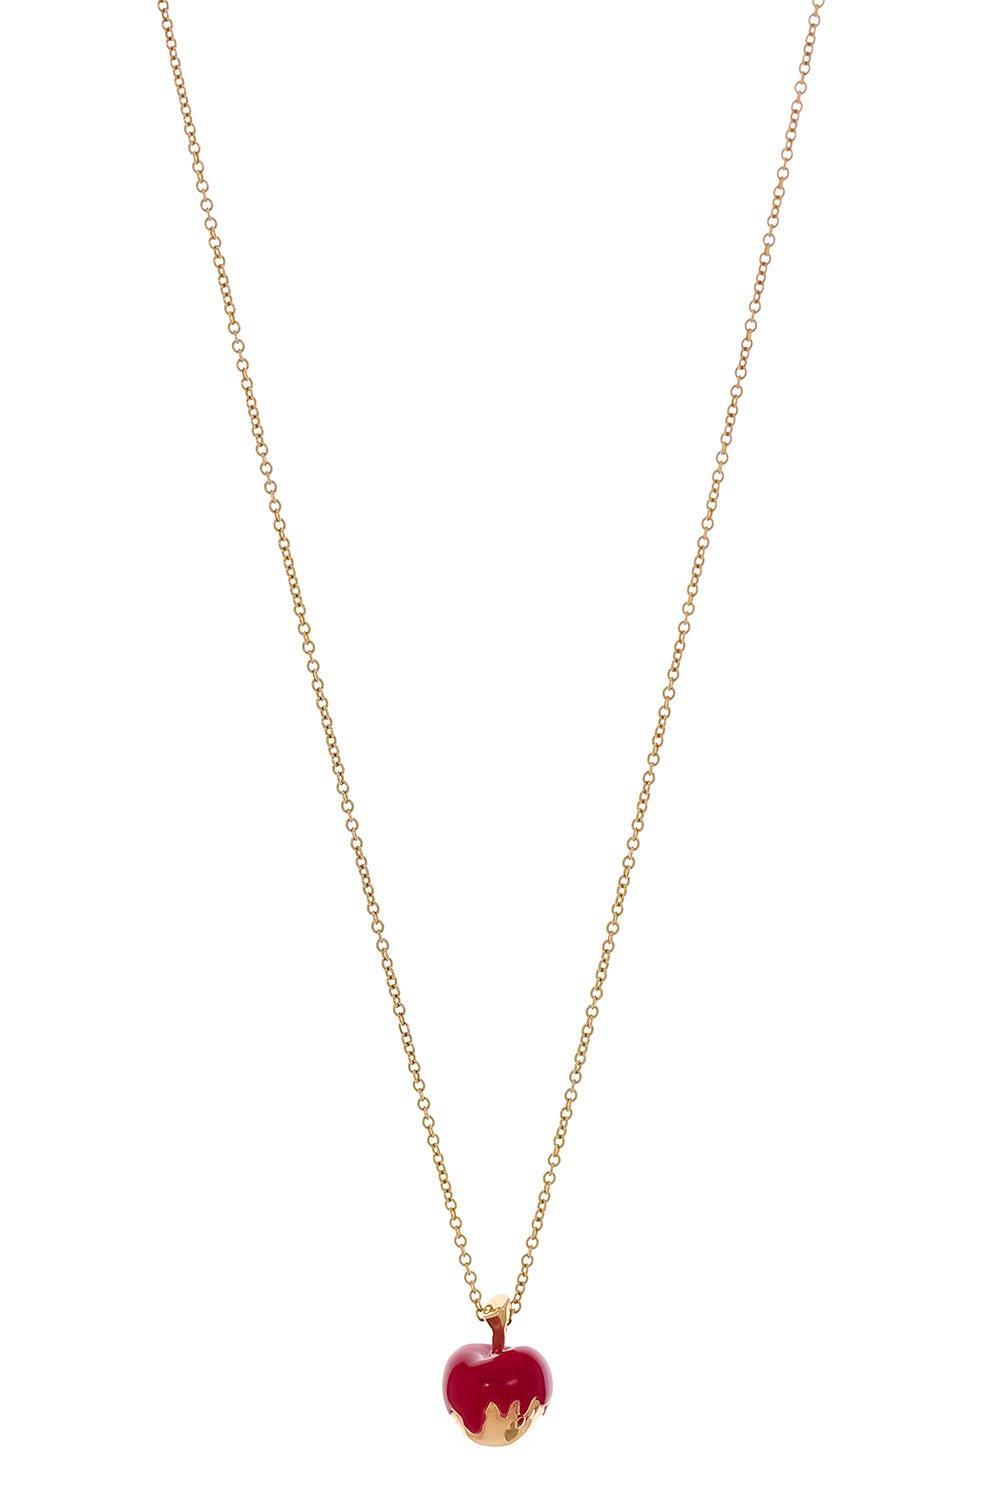 KATHERINE JETTER-Small Cherry Necklace - Pink-YELLOW GOLD